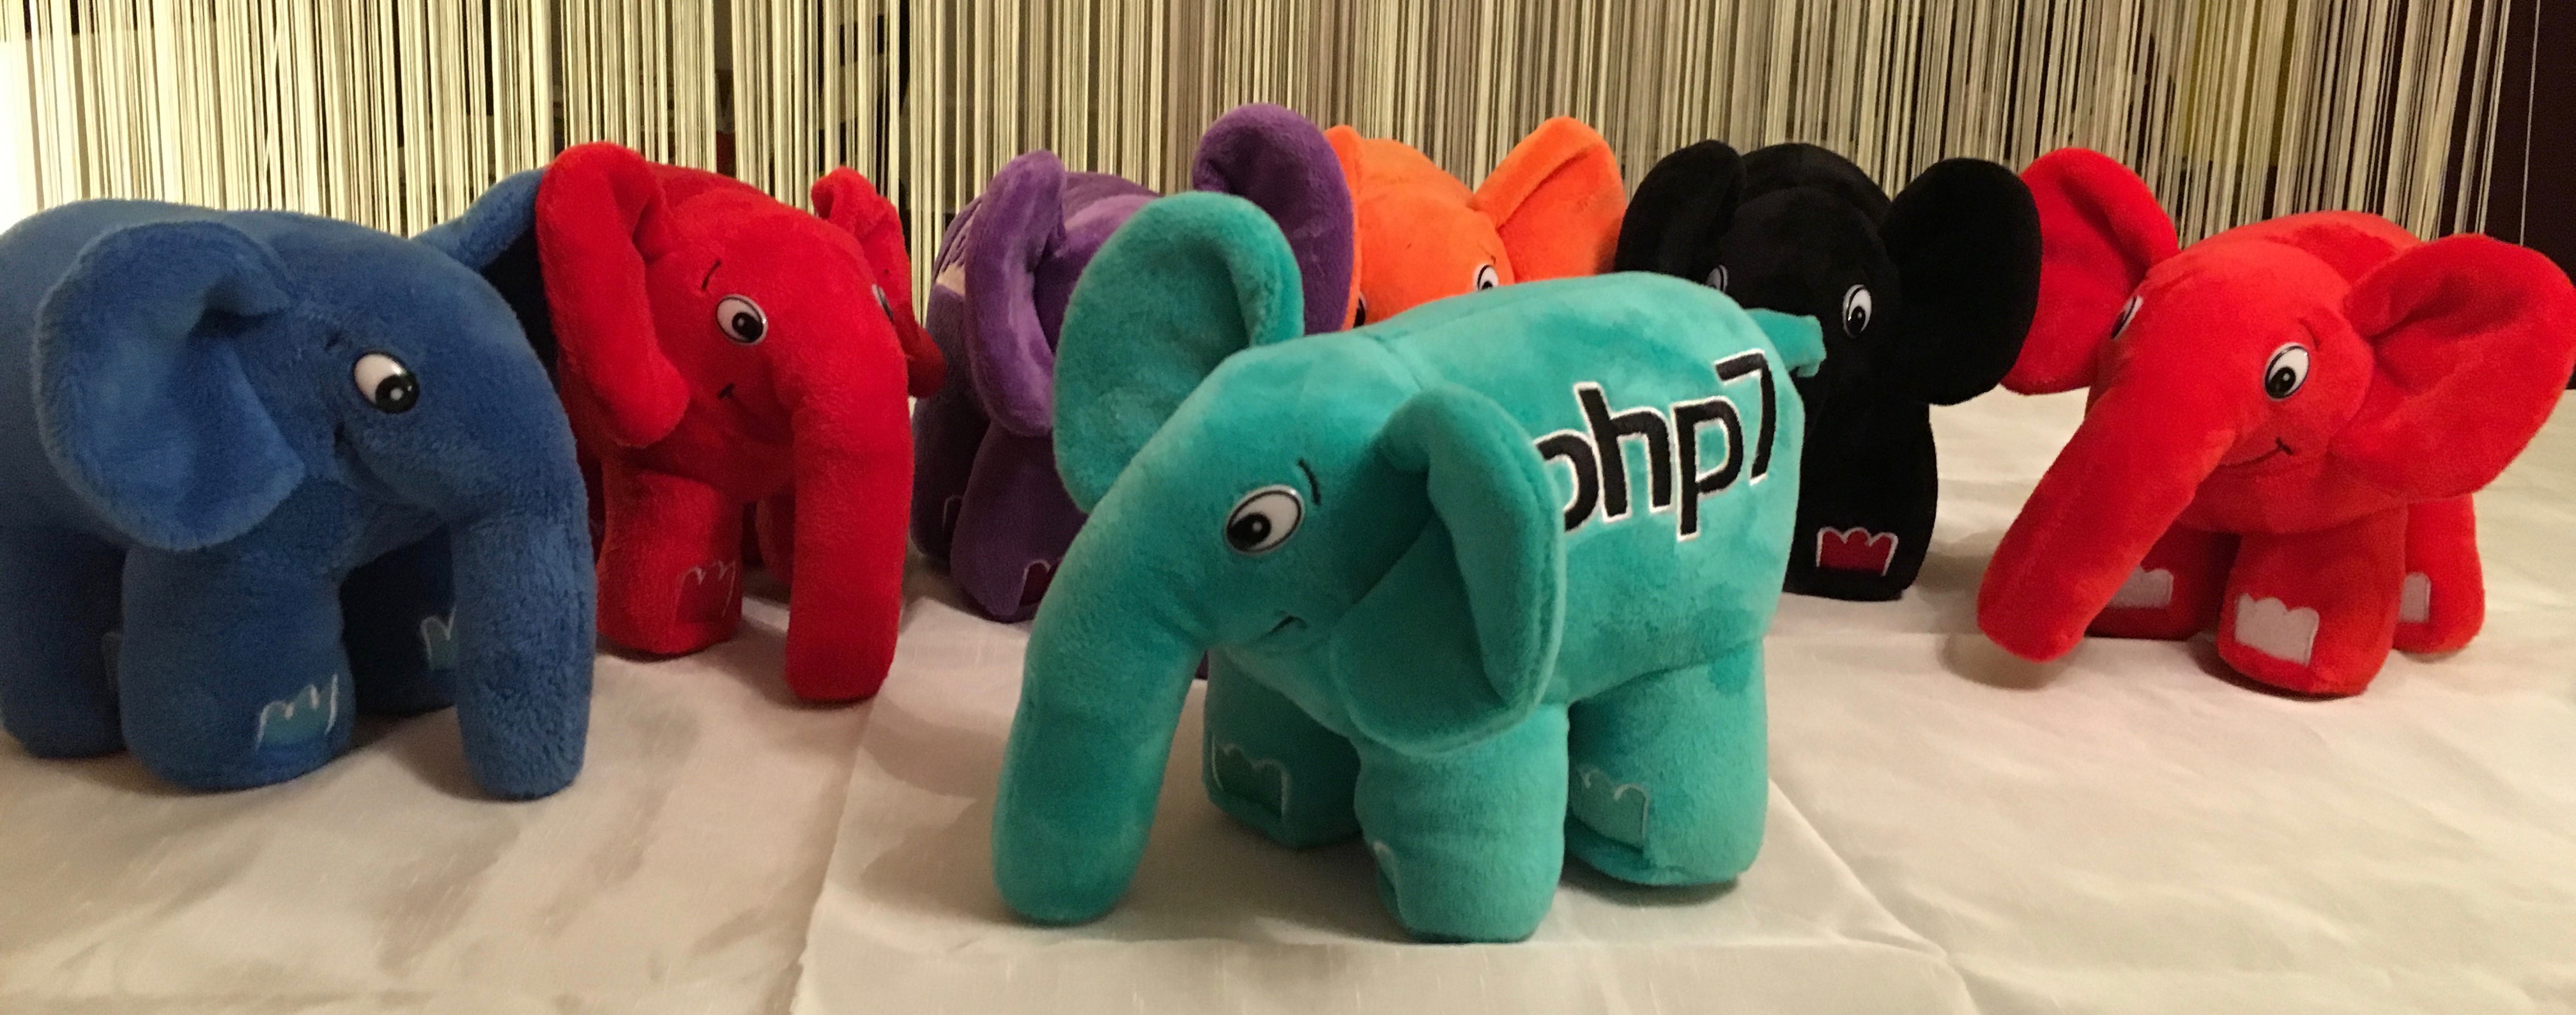 elephpants PHP7